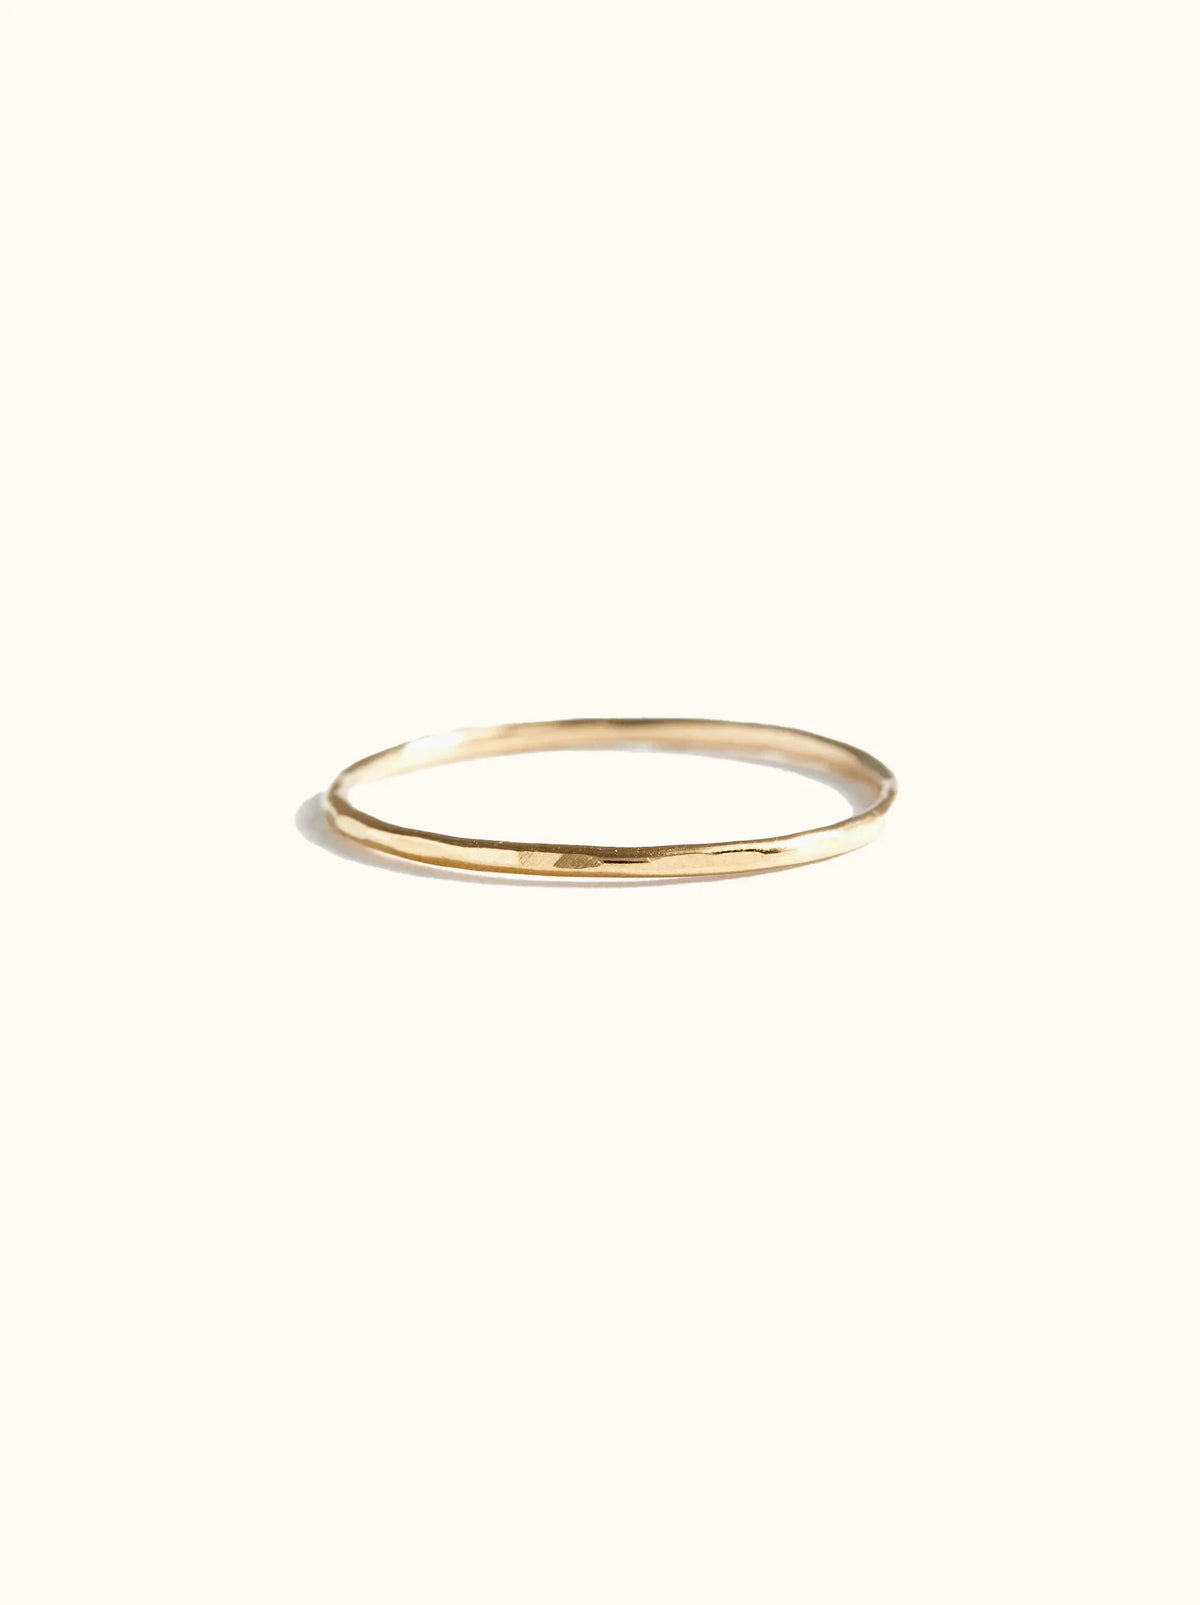 ABLE hammered stacking ring in 14k gold fill